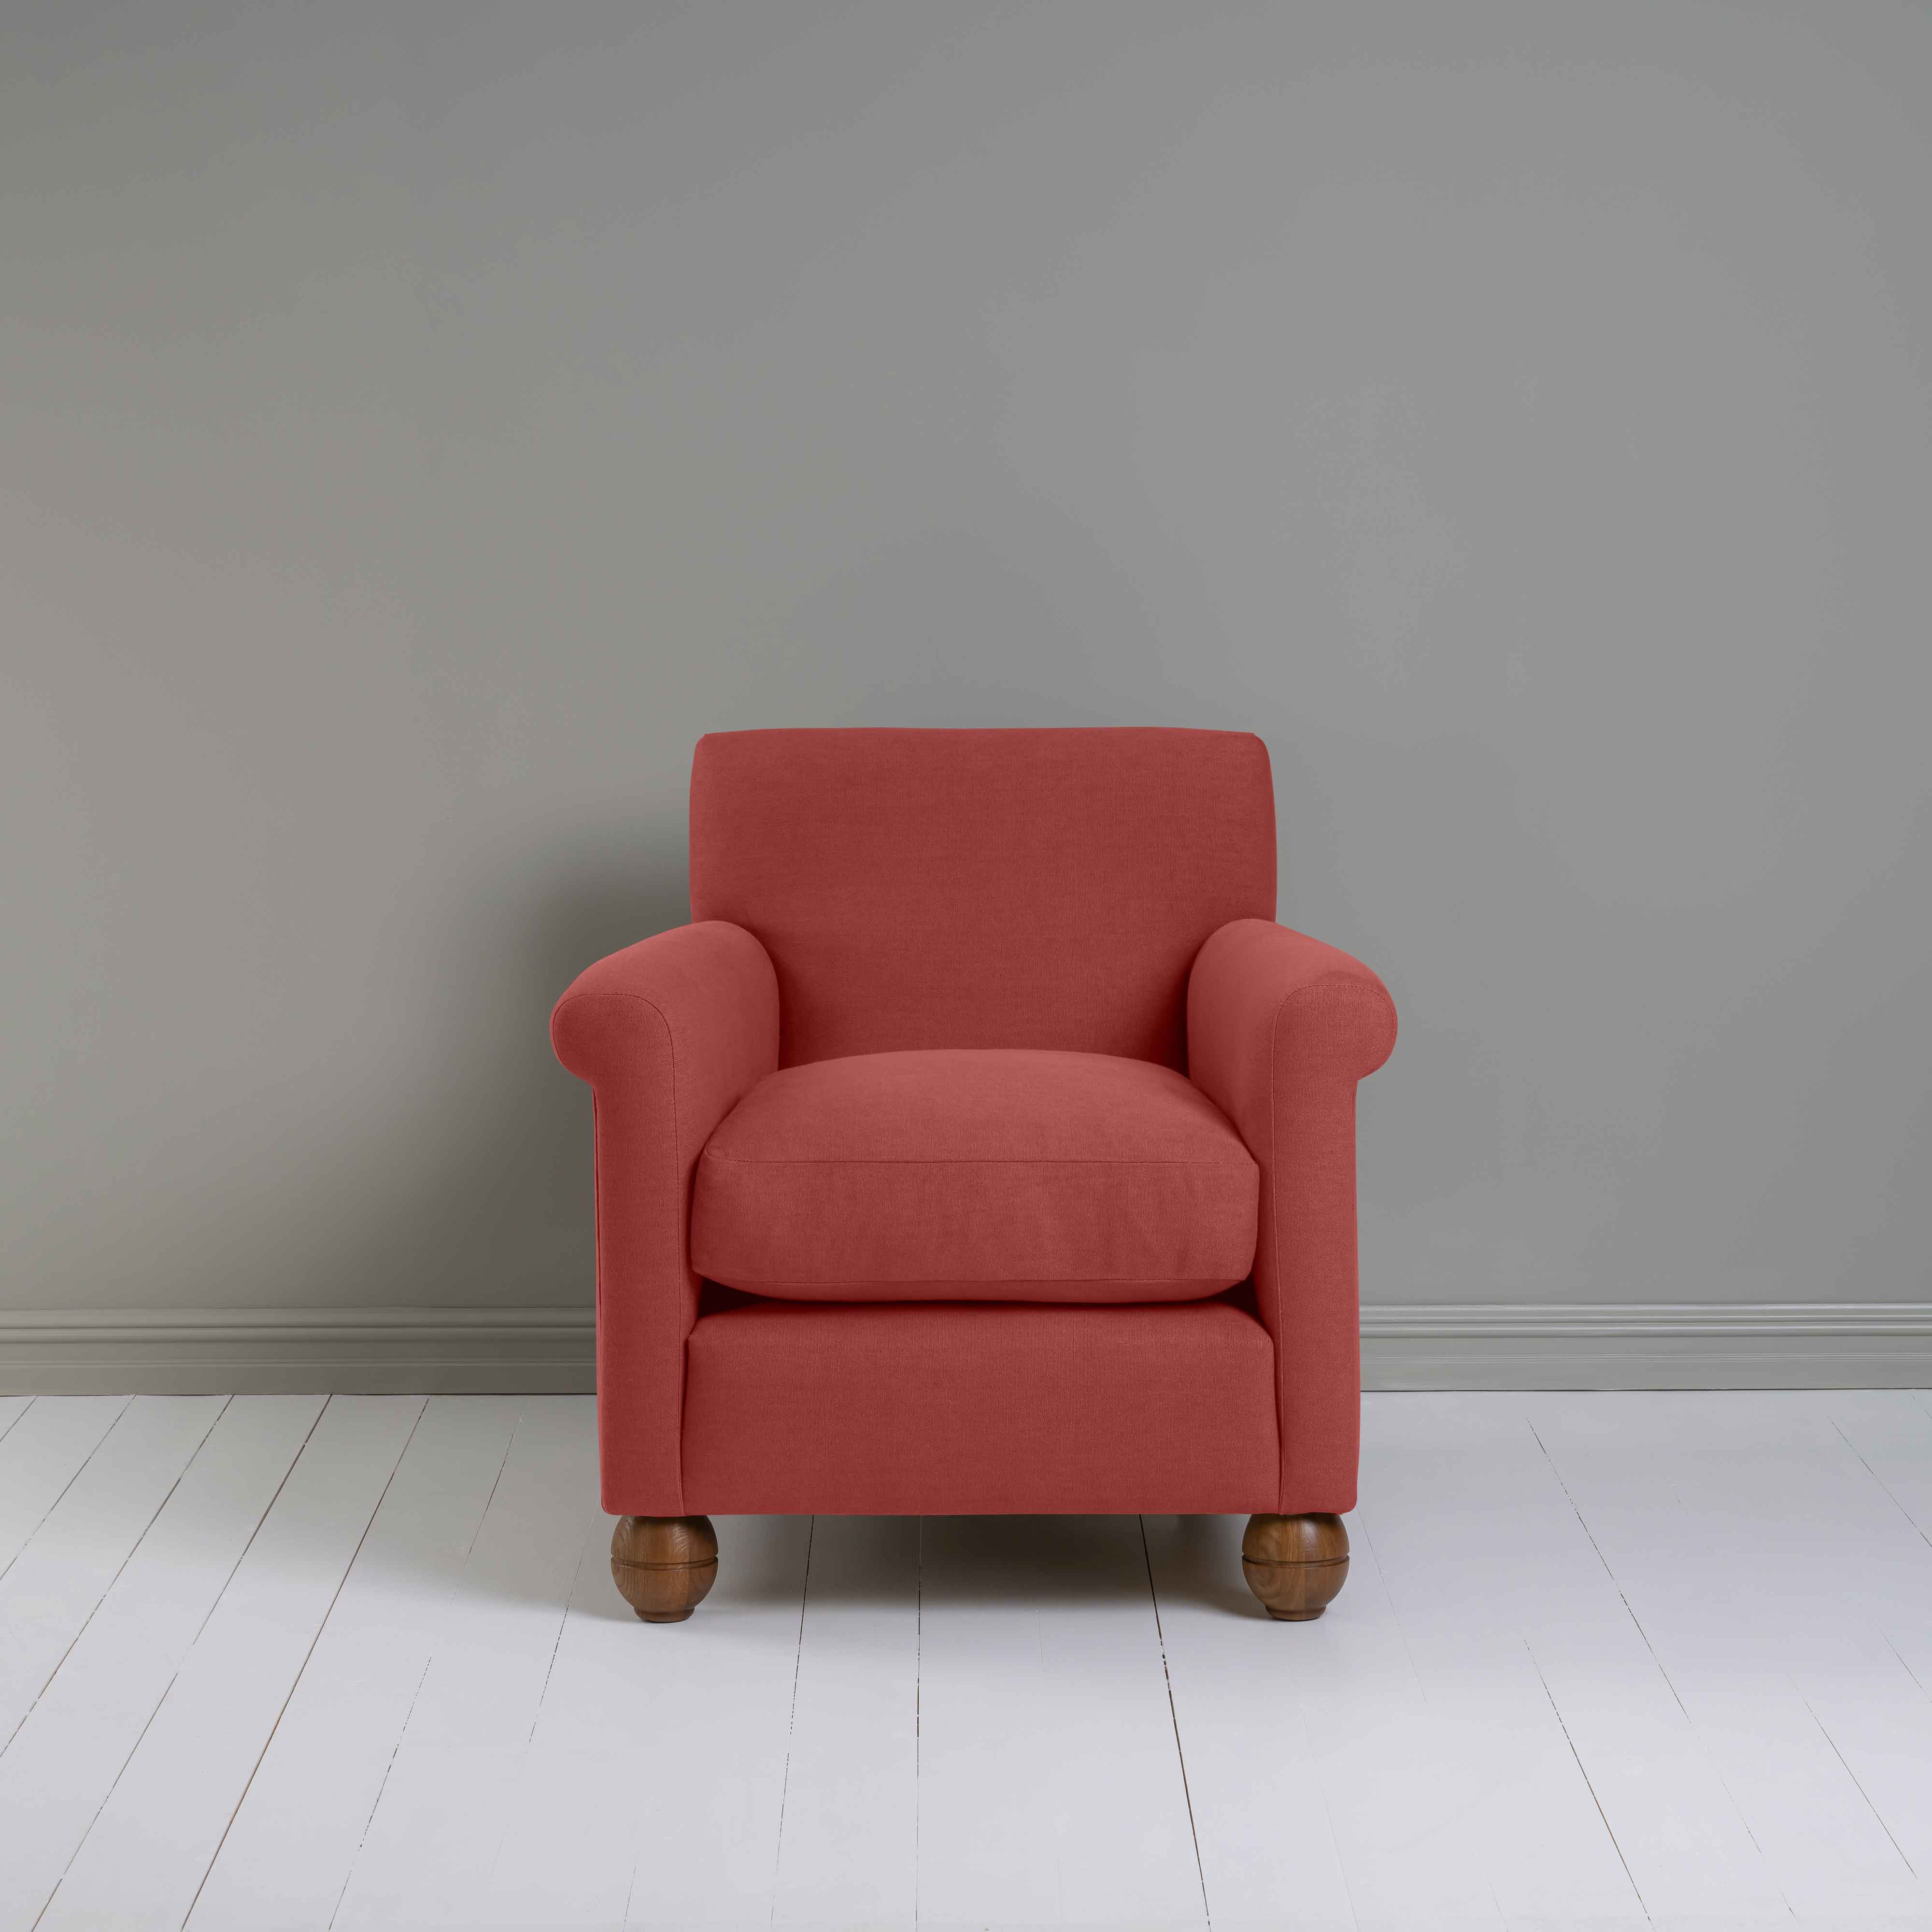  Idler Armchair in Laidback Linen Rouge 